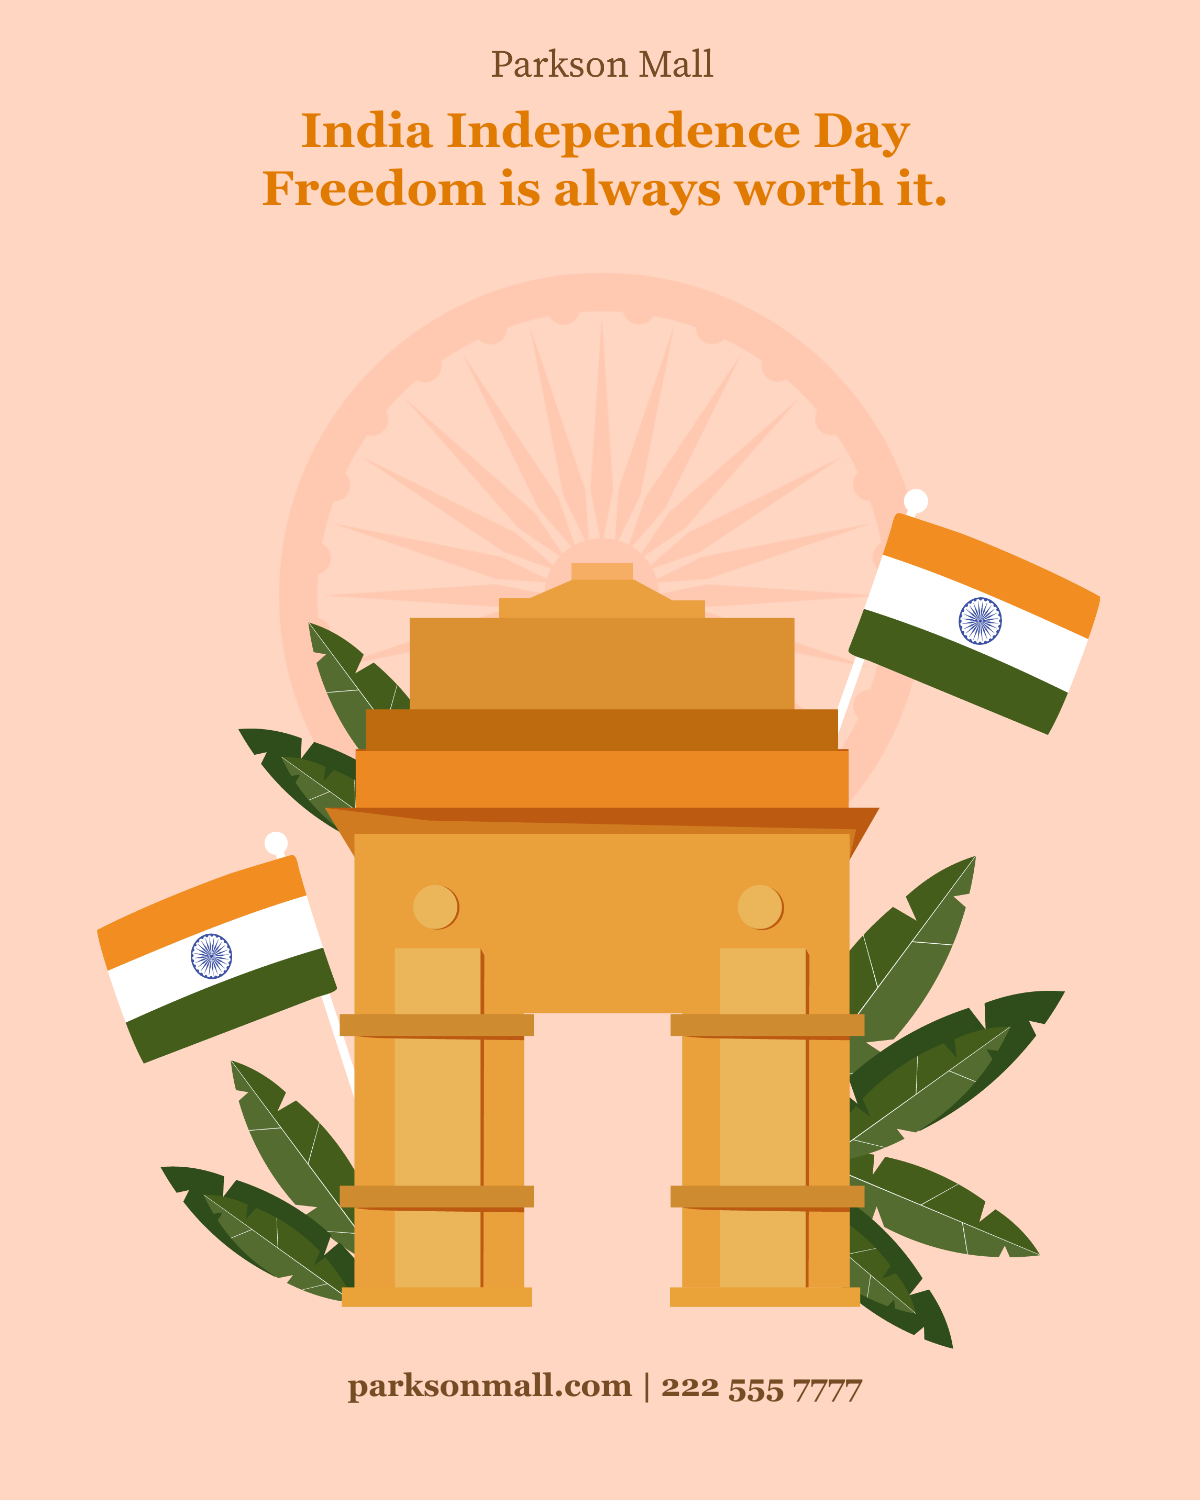 India Independence Day Facebook Post Template